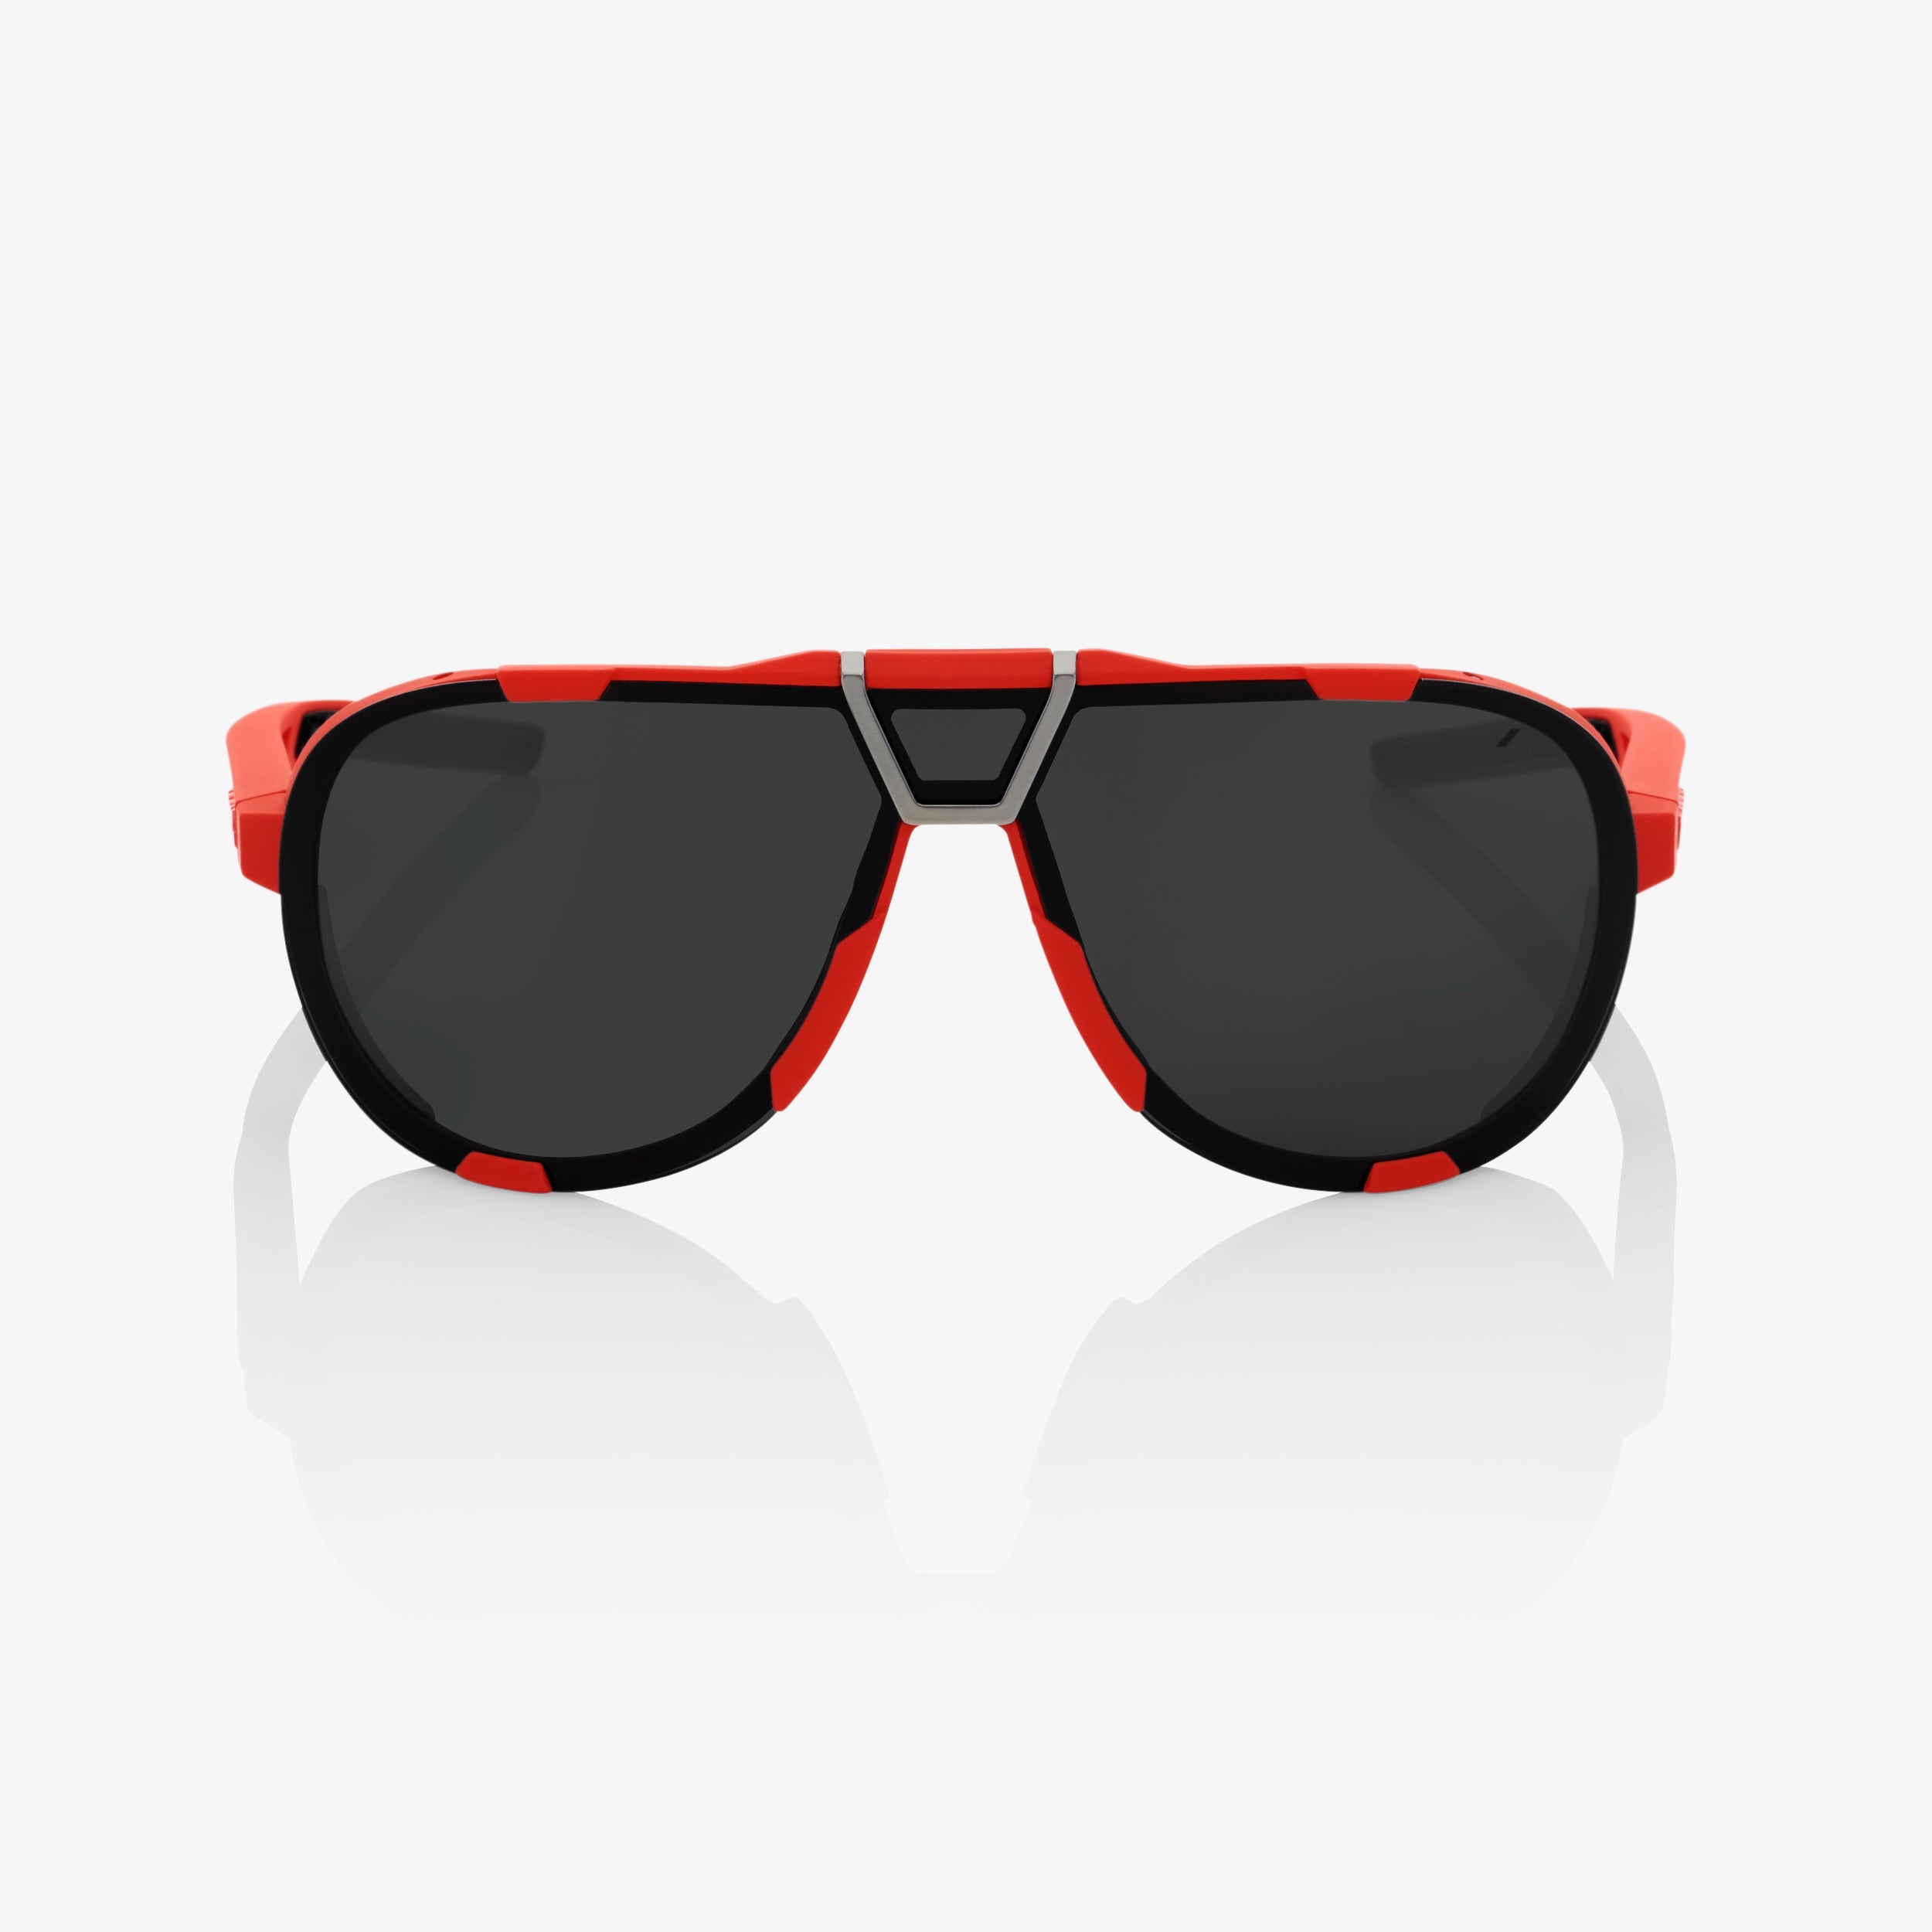 WESTCRAFT Soft Tact Red Black Mirror Lens - Secondary